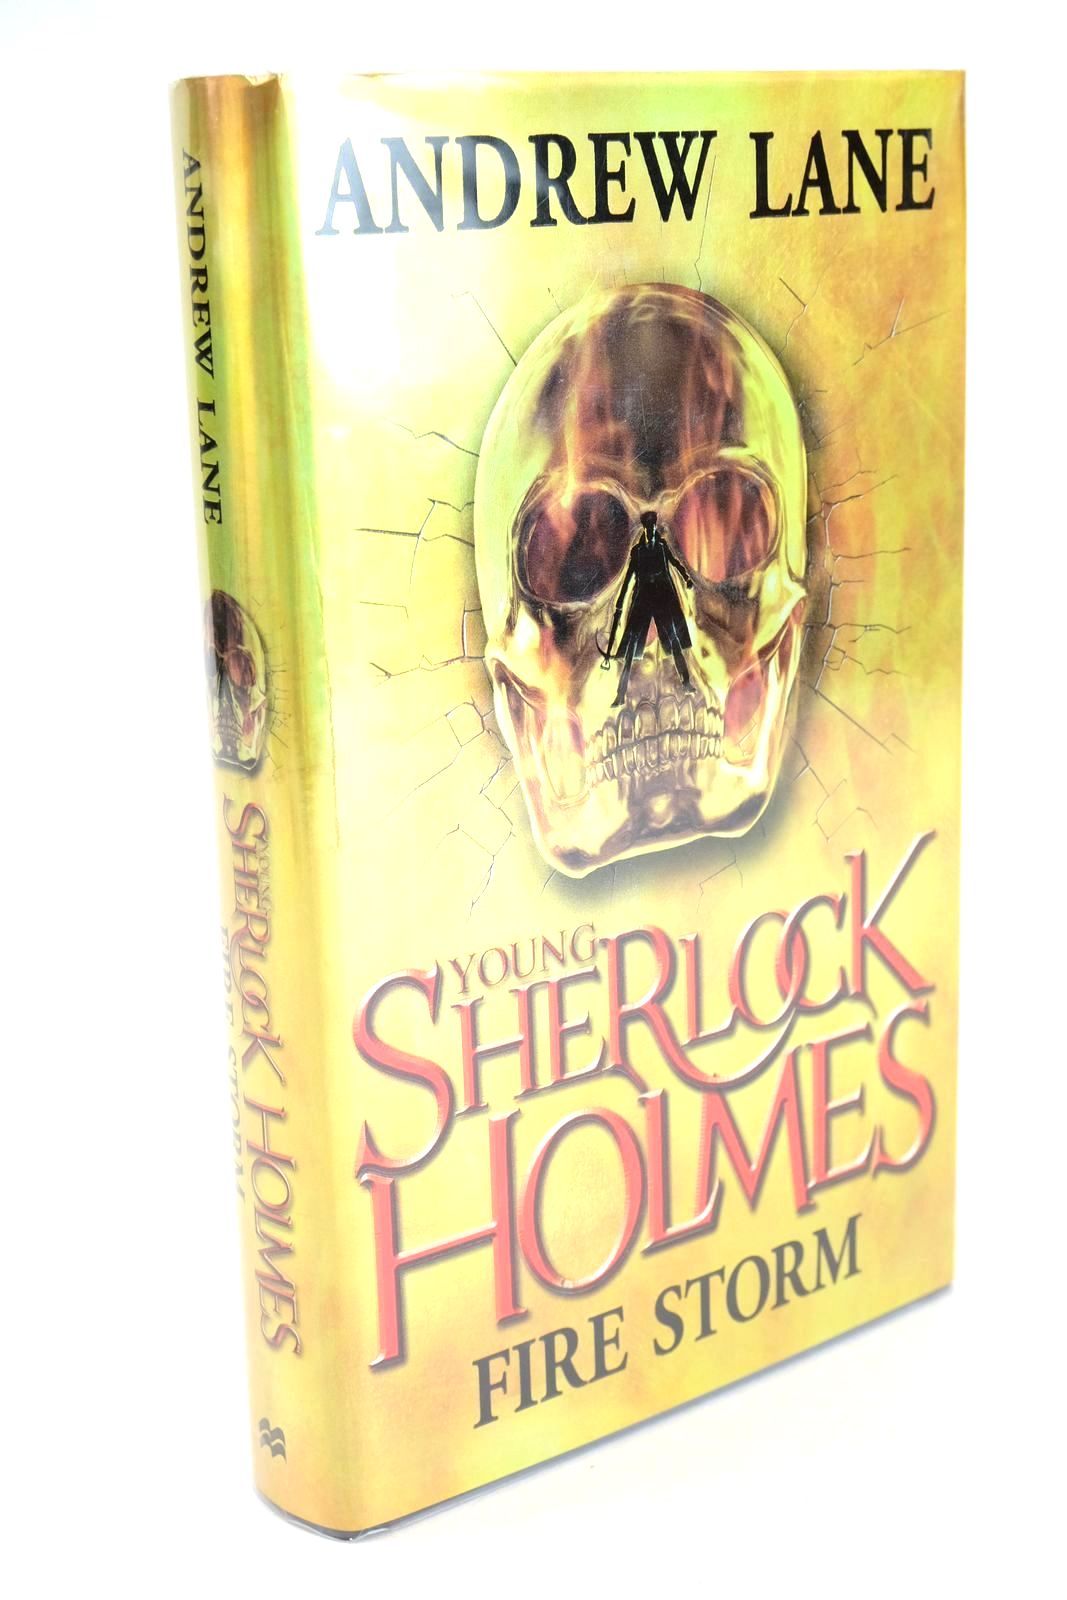 Photo of YOUNG SHERLOCK HOLMES - FIRE STORM written by Lane, Andrew illustrated by Walker, Kev Hadley, Sam published by Macmillan Children's Books (STOCK CODE: 1325752)  for sale by Stella & Rose's Books